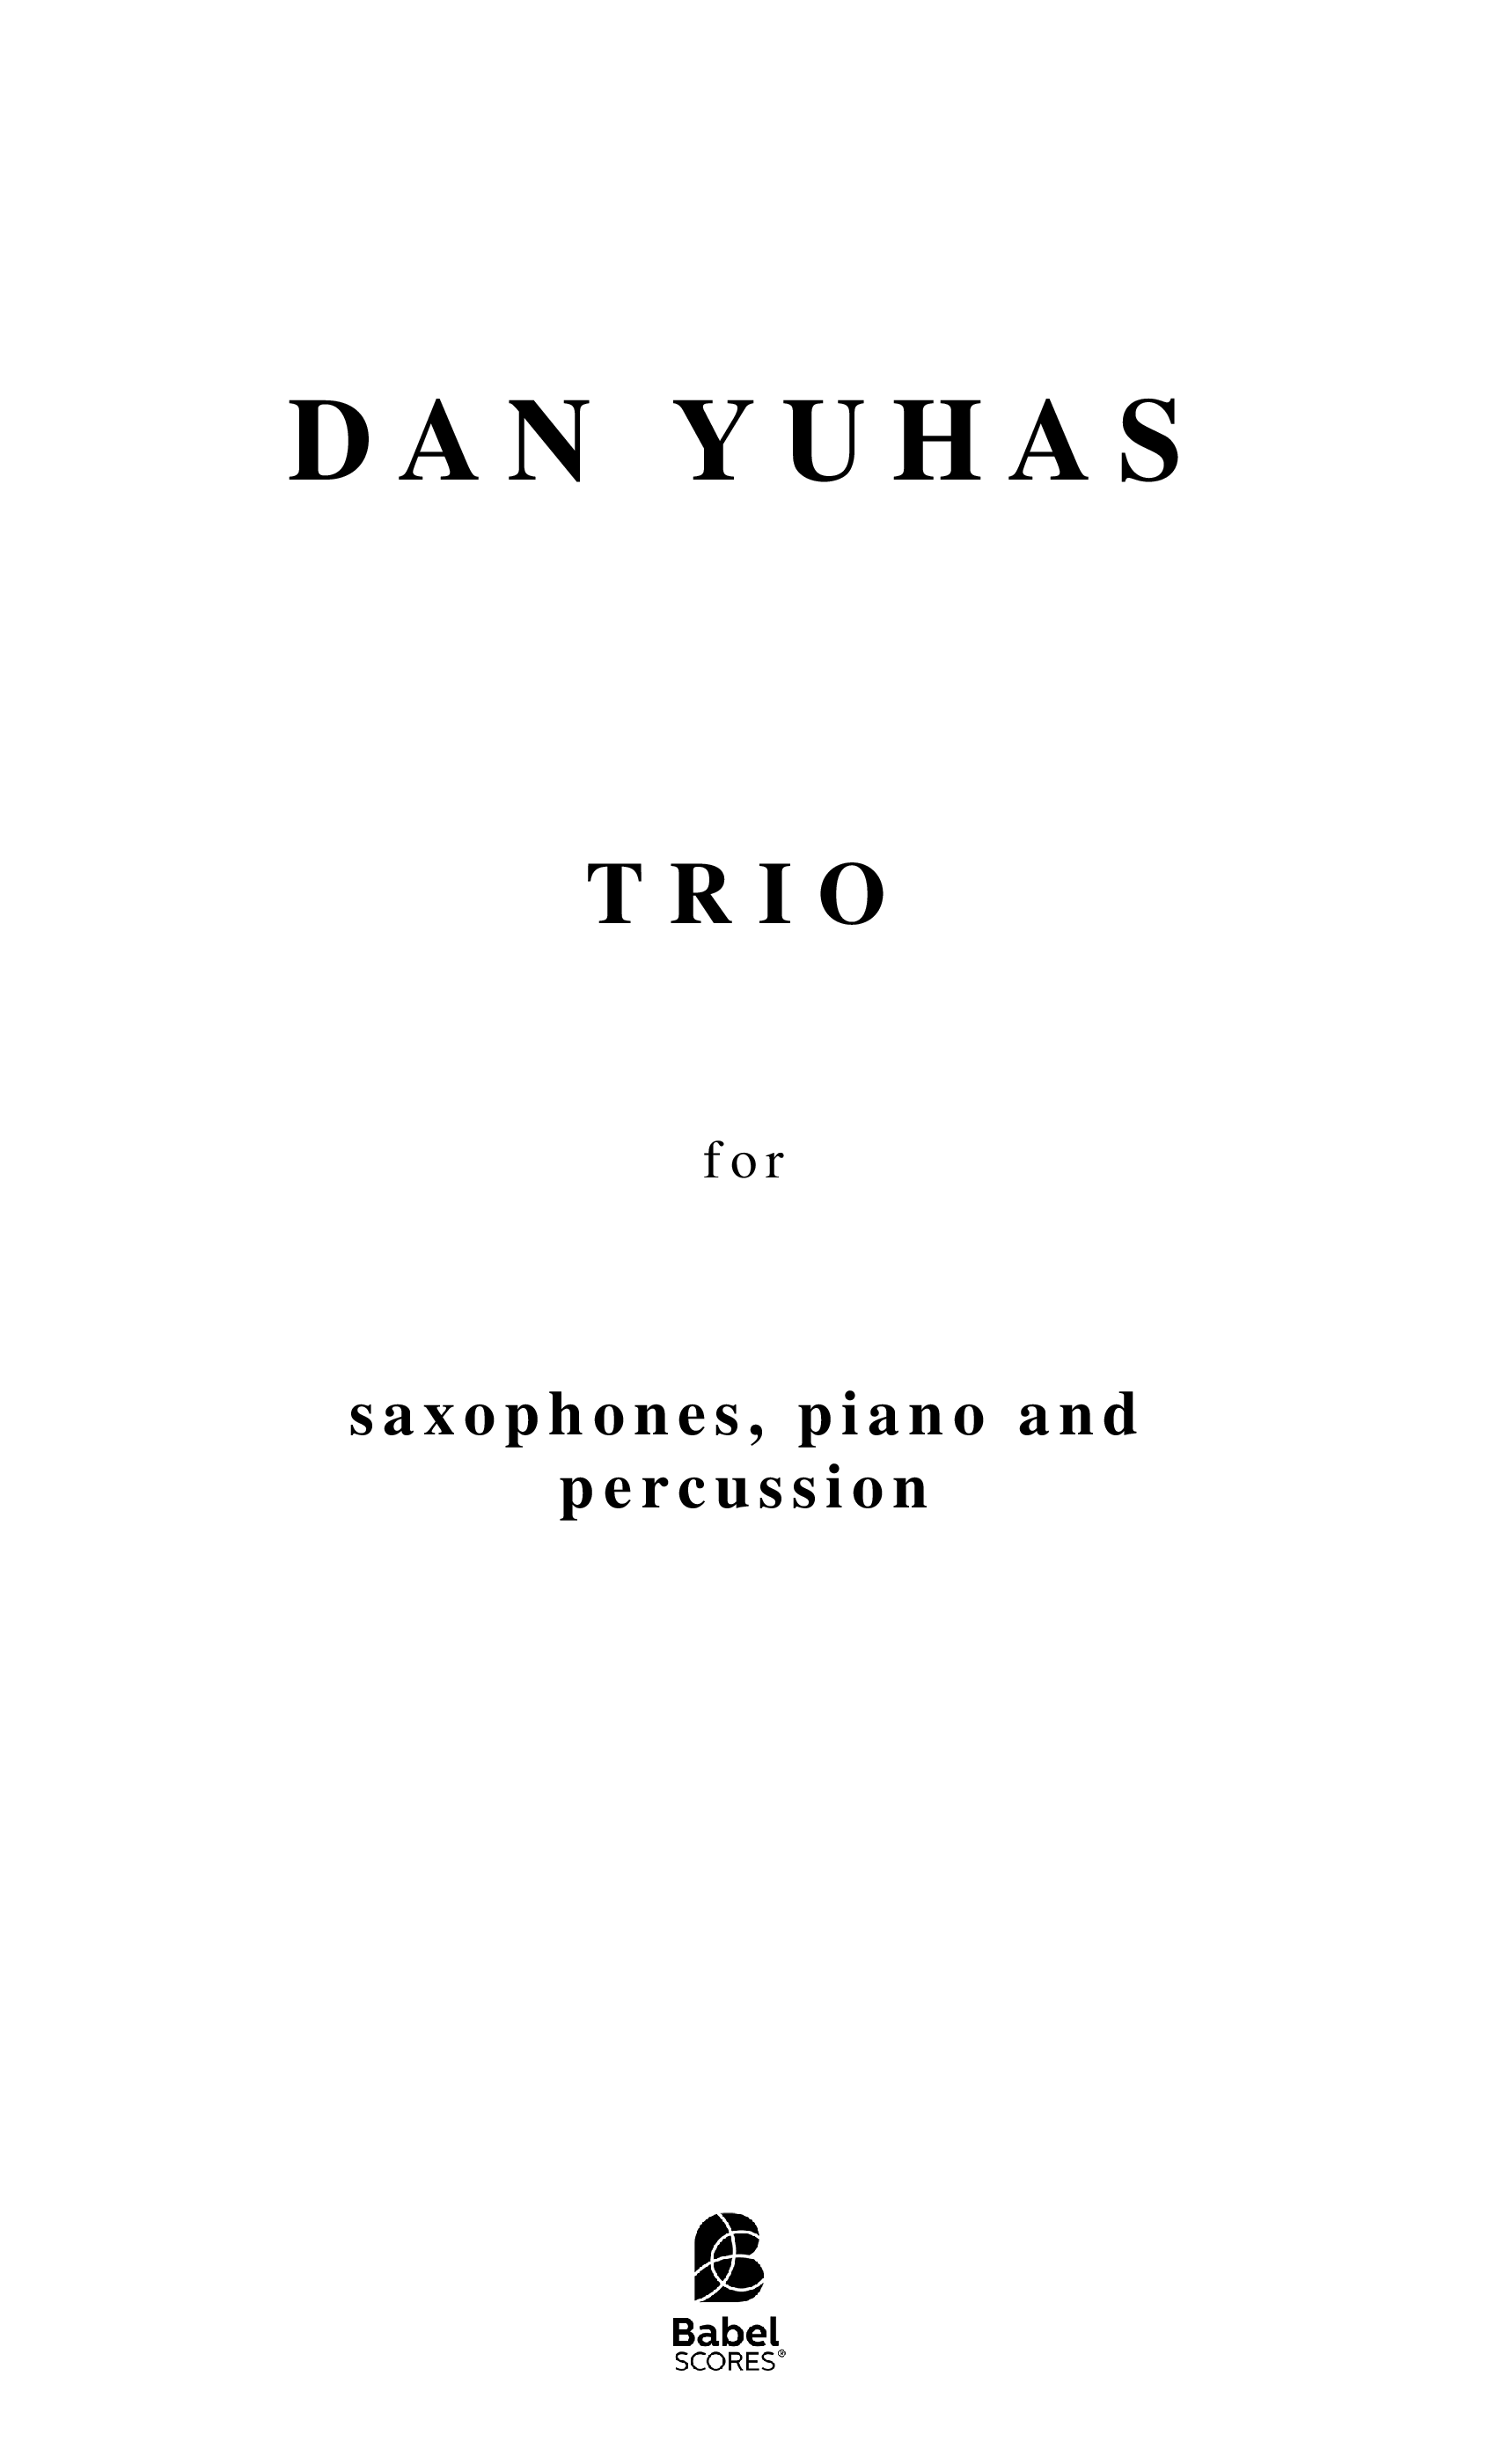 Trio for saxophones piano and percussion A4 z